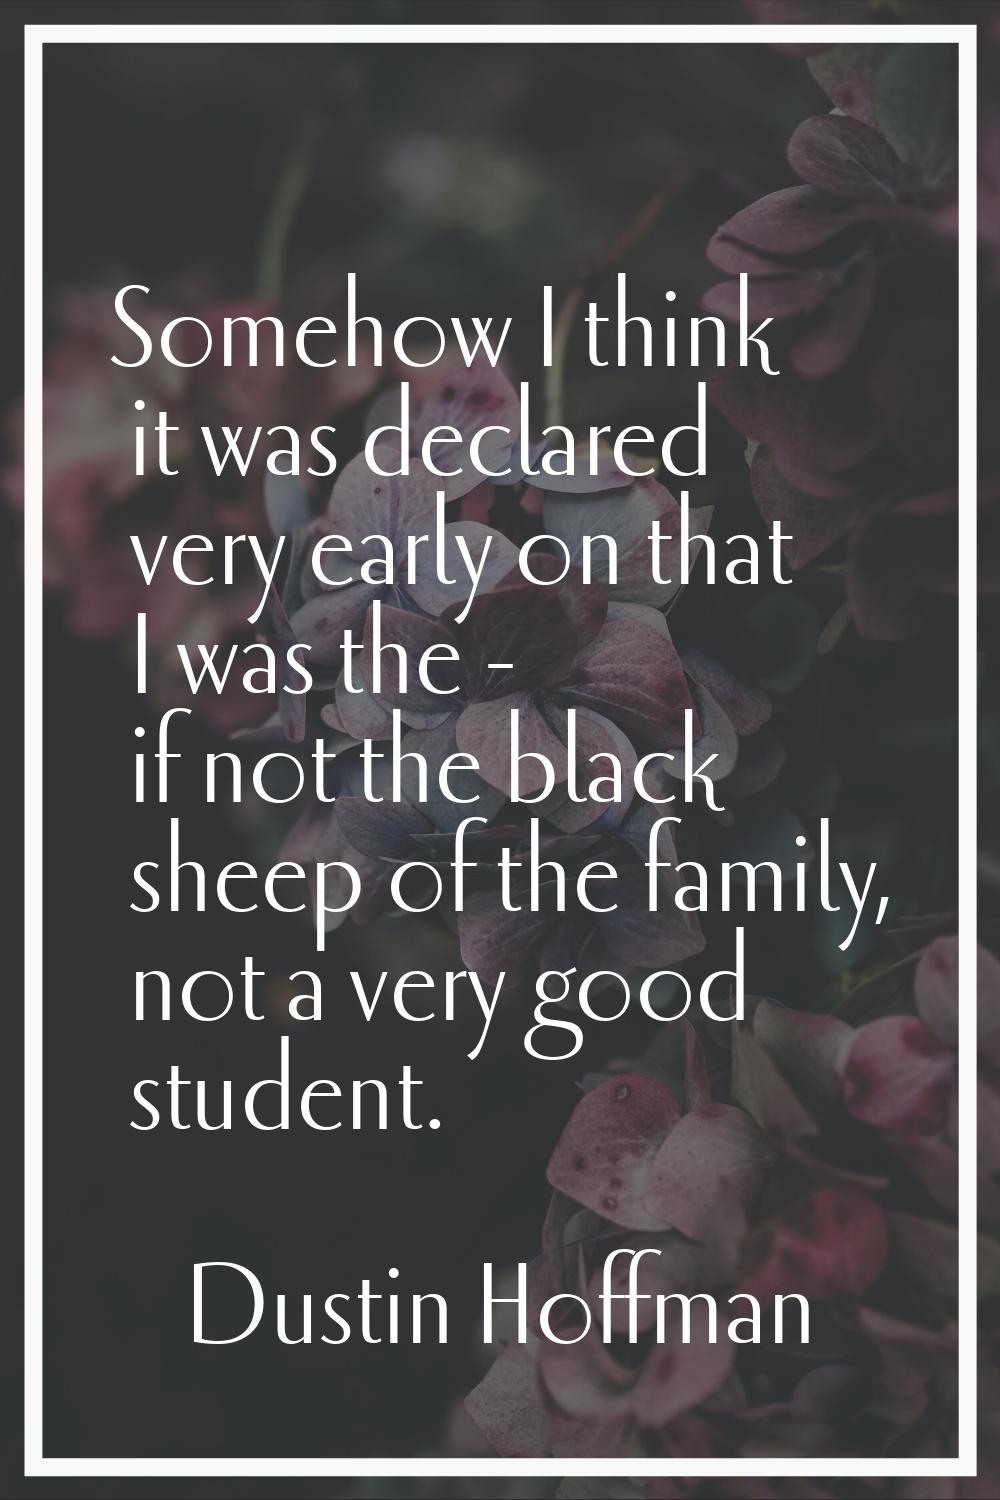 Somehow I think it was declared very early on that I was the - if not the black sheep of the family